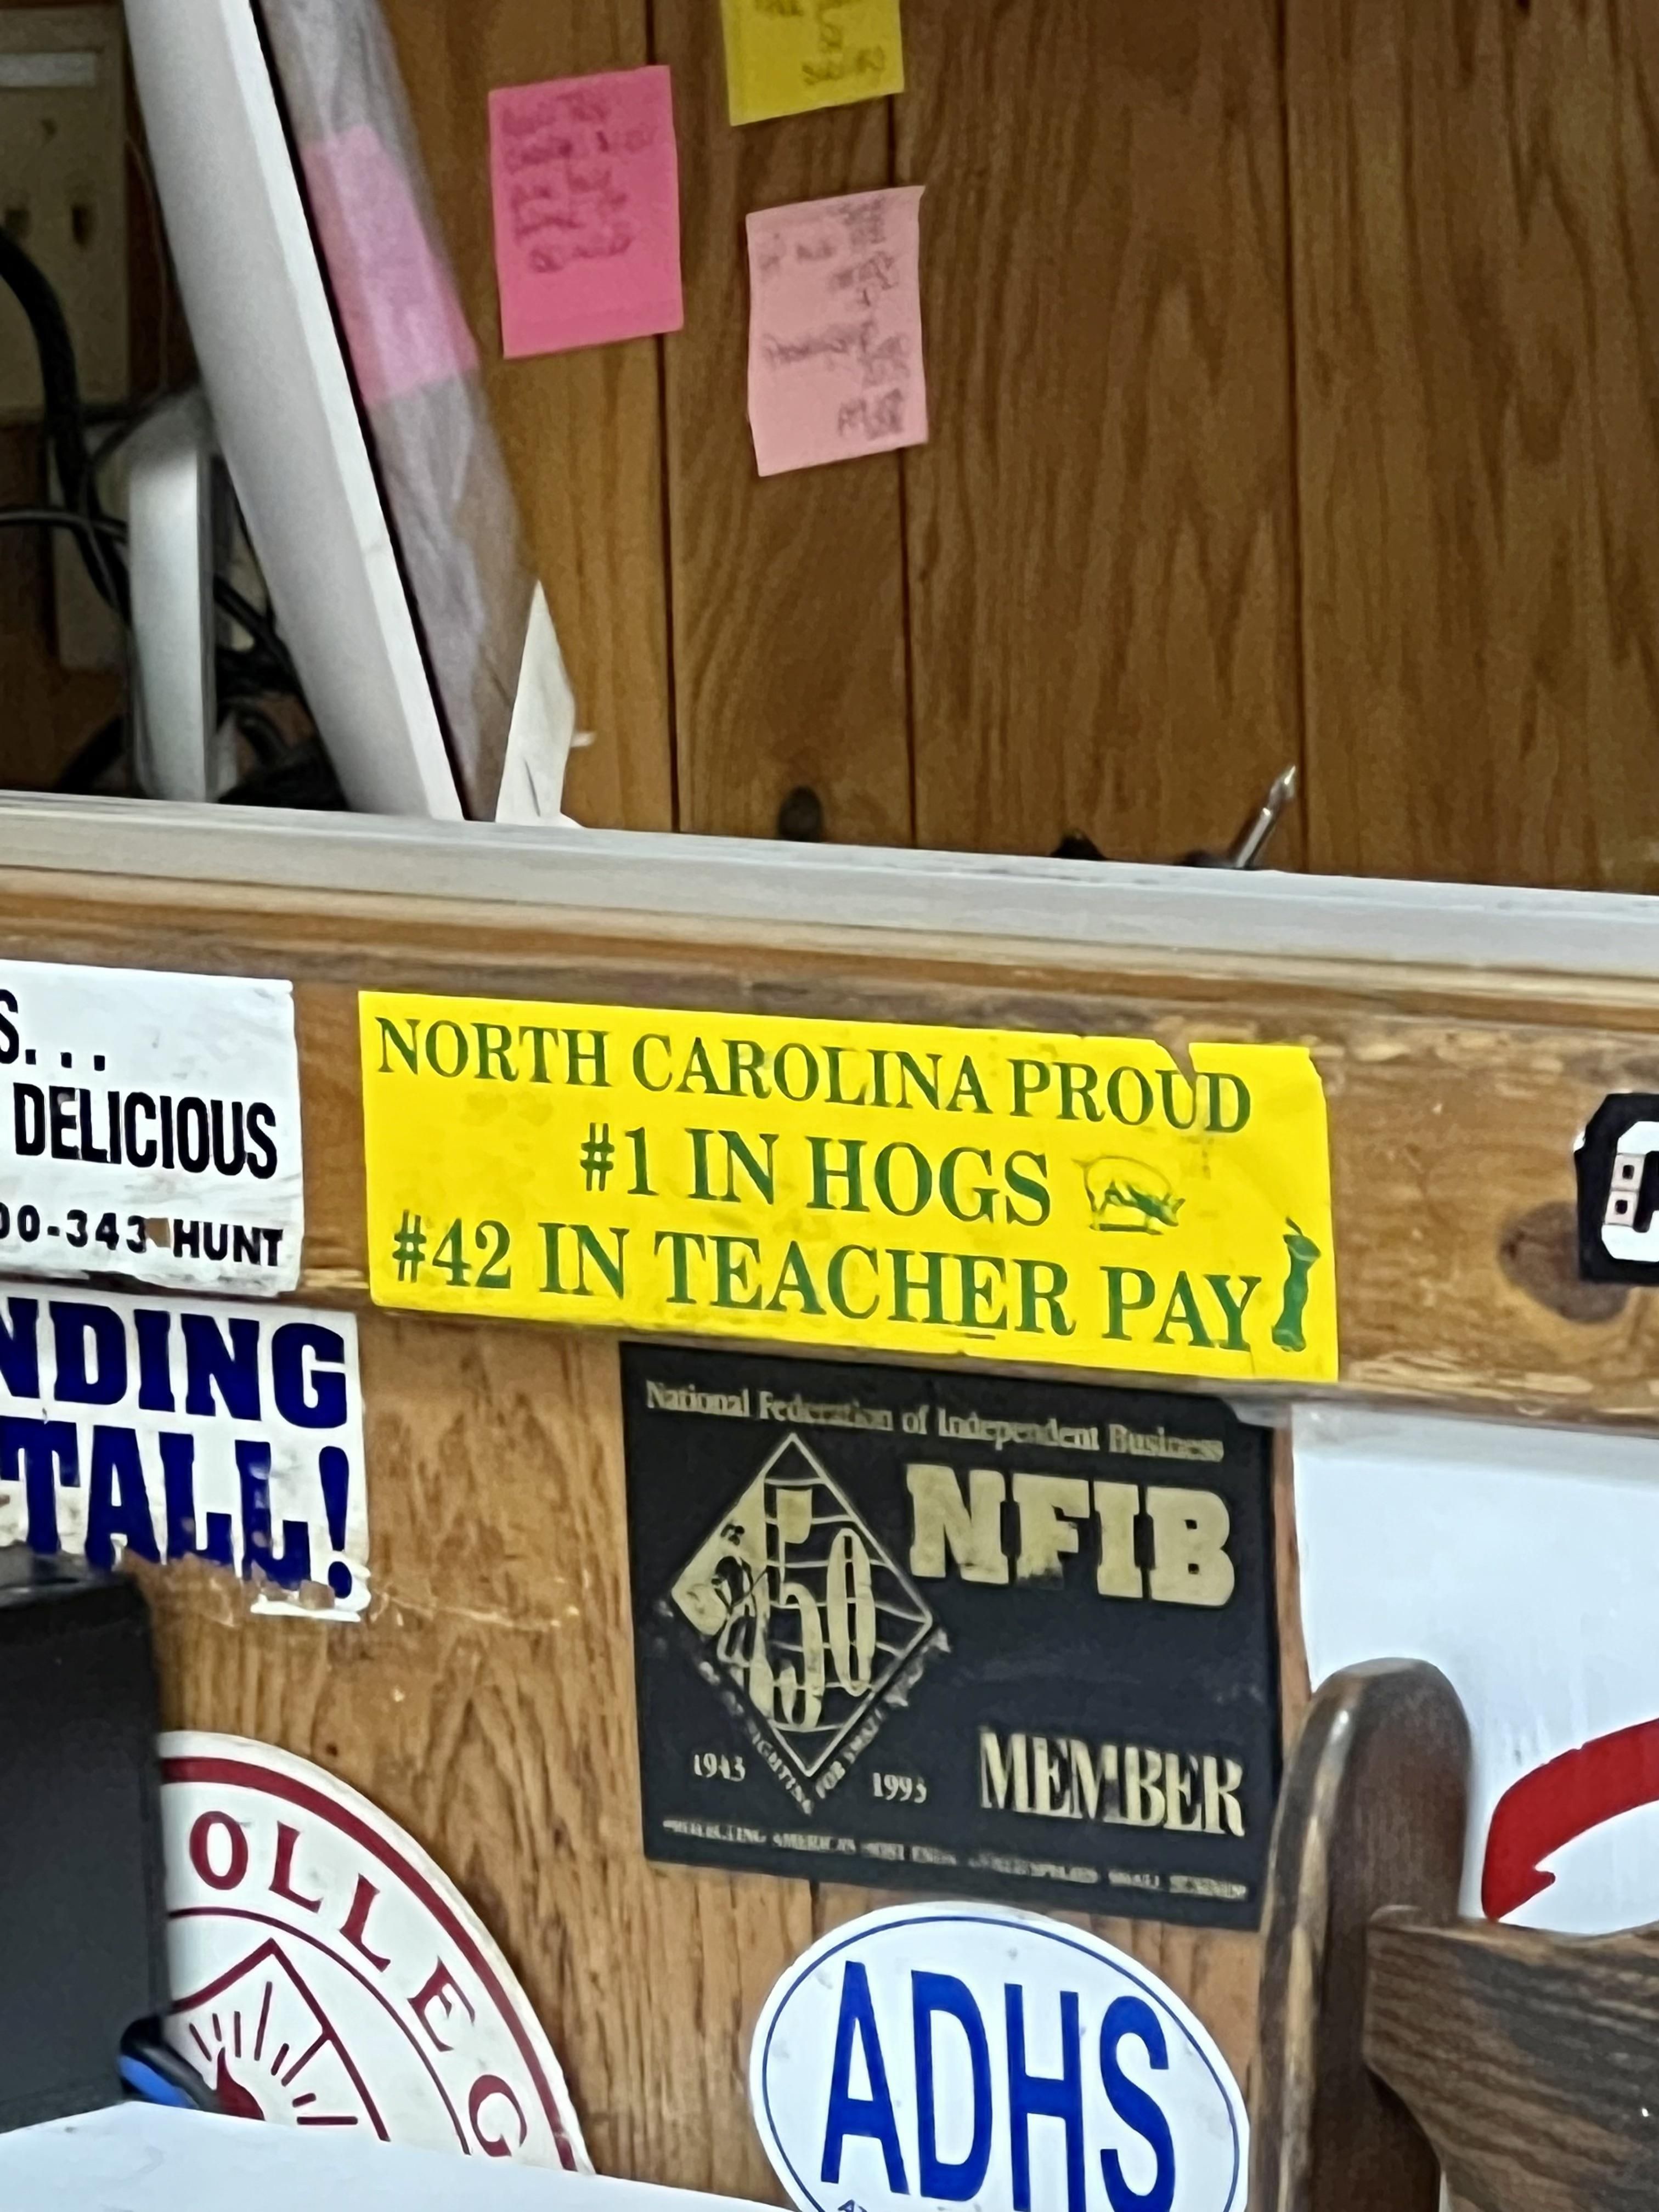 On the wall at a bbq joint in North Carolina.